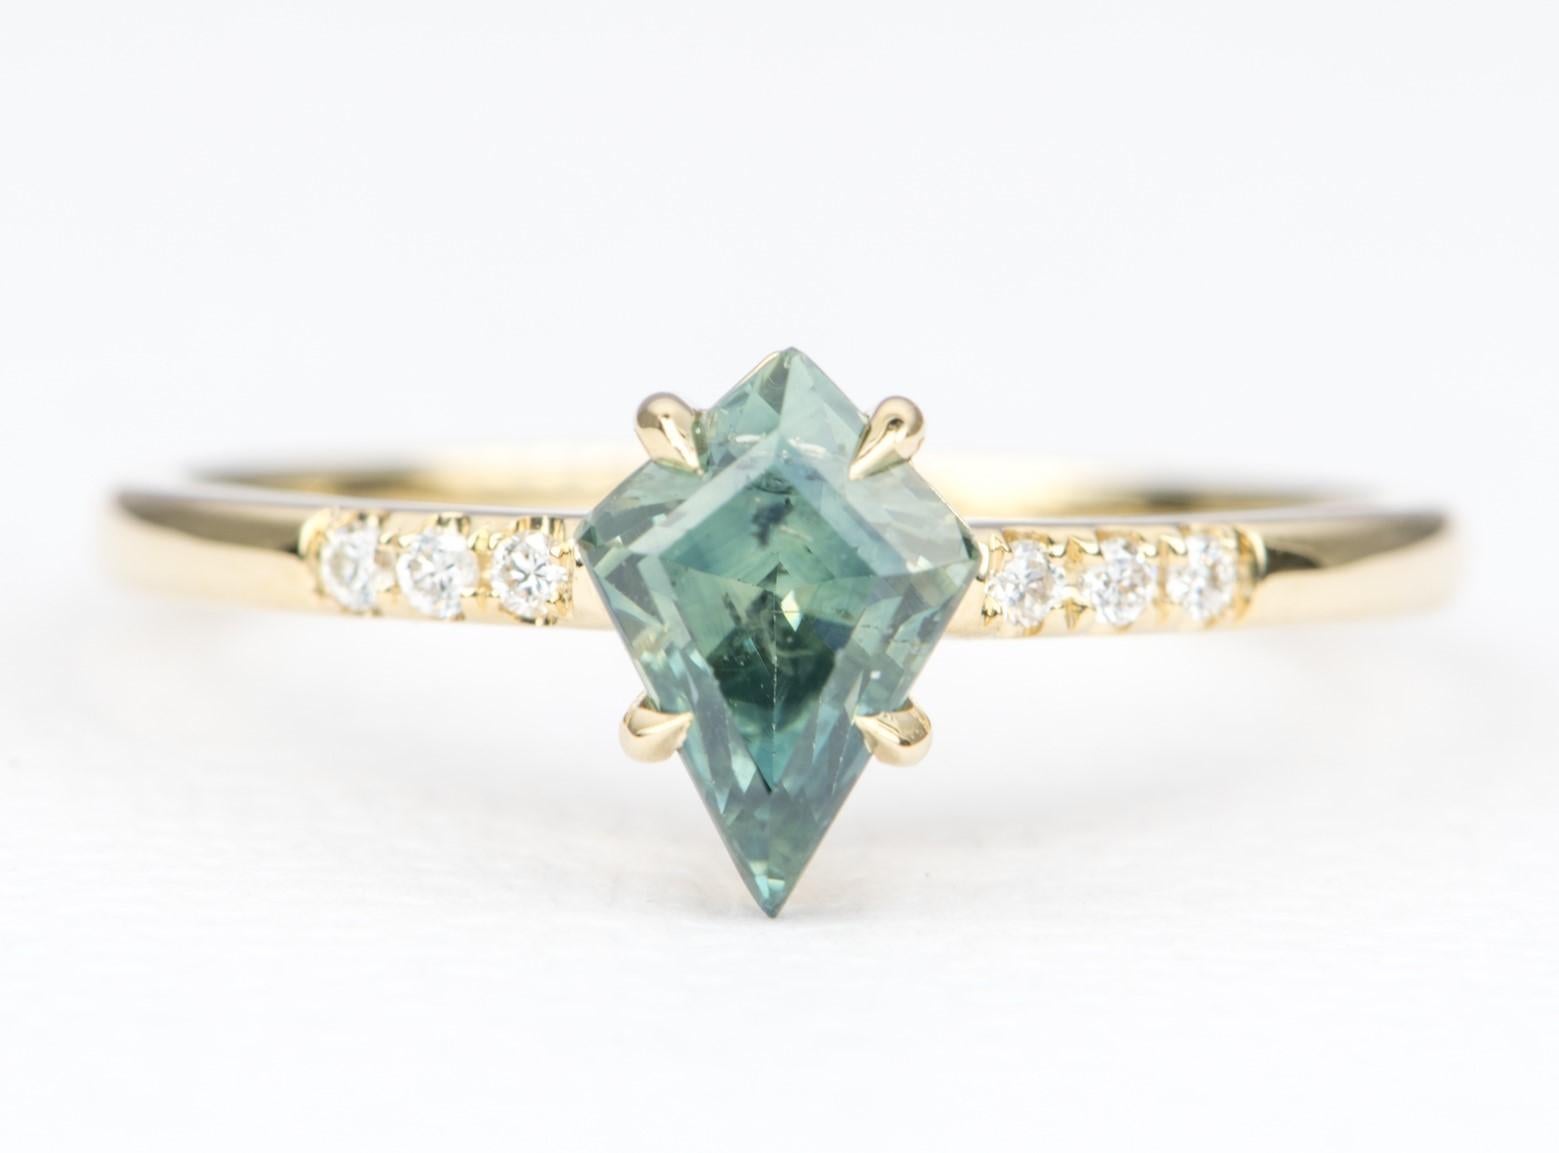 ♥  Solid 14K yellow gold ring set with a kite-shaped sapphire held with diagonal claw prongs, flanked with colorless diamonds on the band
♥  The center sapphire is a stunning teal color that is a mixture of blue and green

♥  Material: 14K yellow